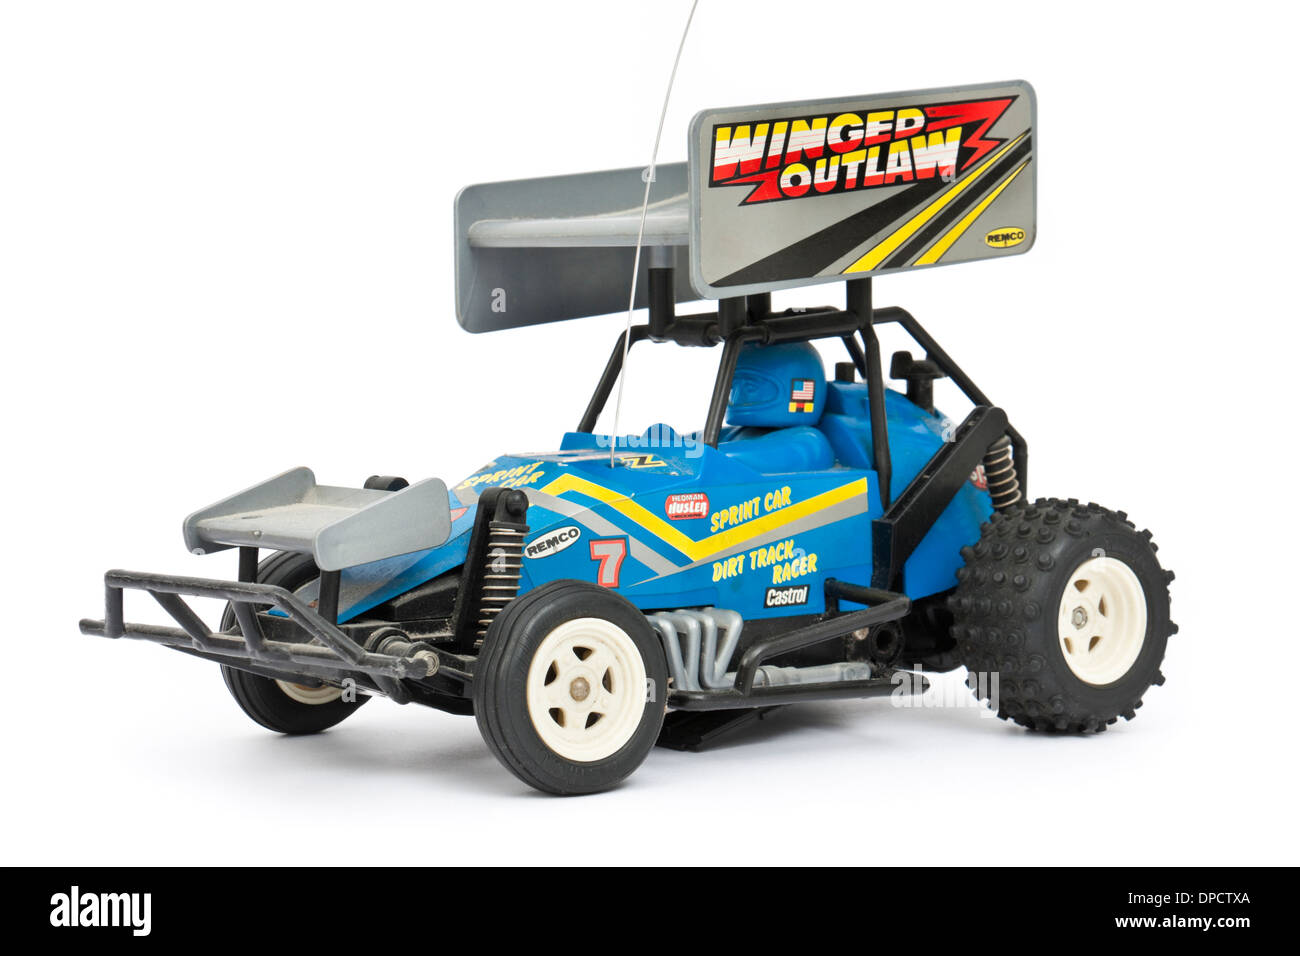 Vintage 1980's Winged Outlaw radio-controlled sprint car by Remco (Azrak-Hamway International Inc) Stock Photo